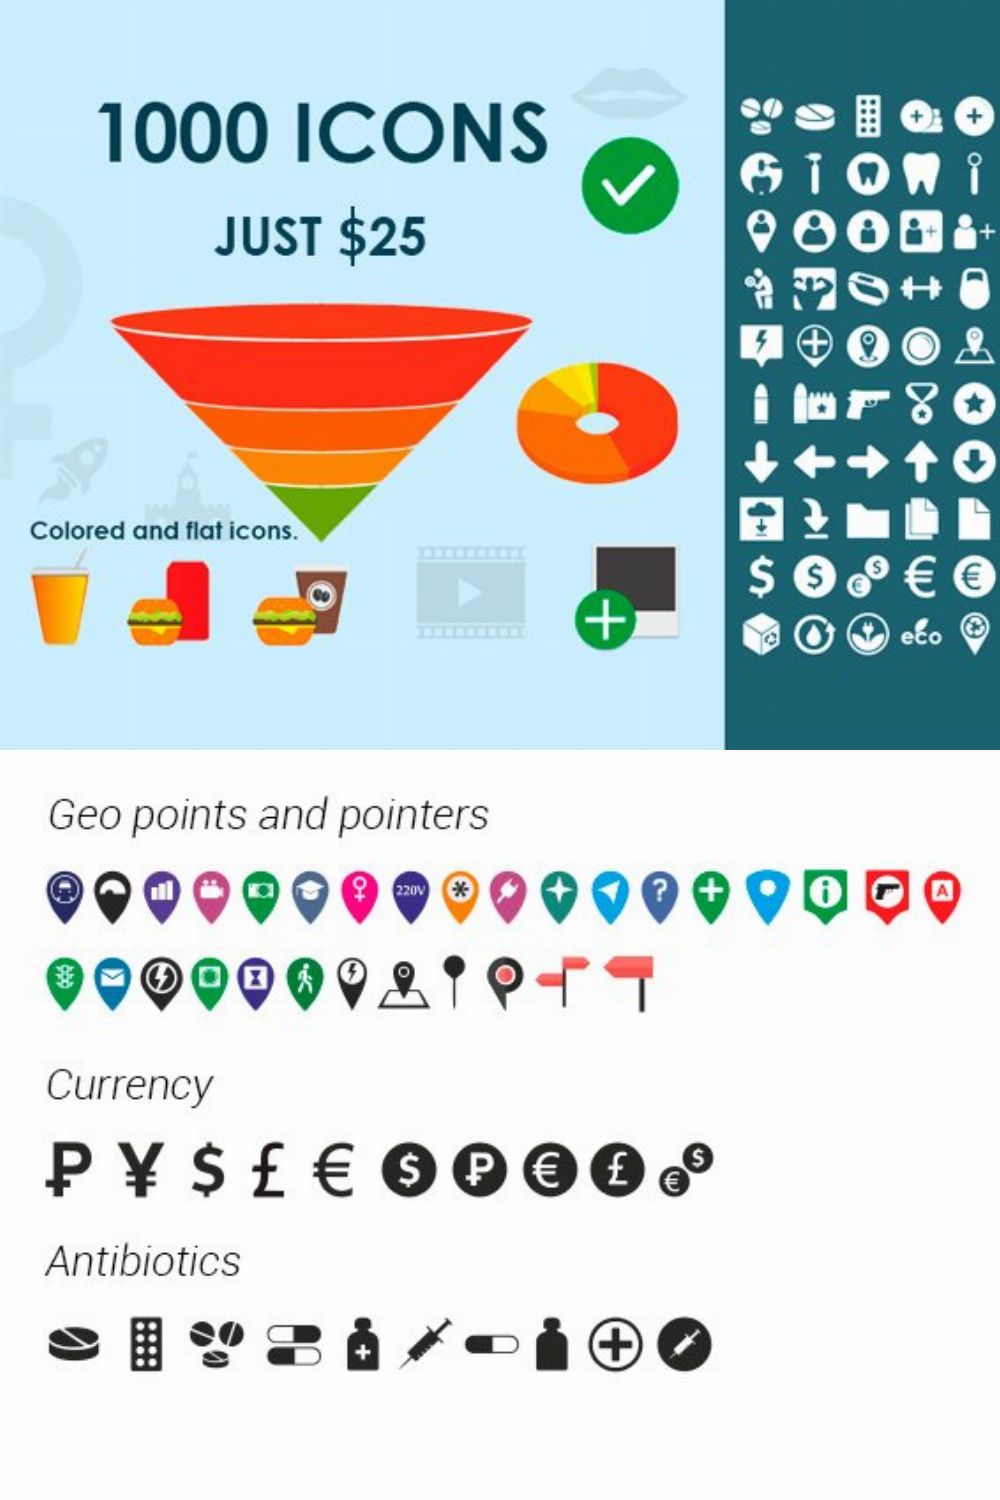 1000 SVG icons for web and mobile UI pinterest preview image.